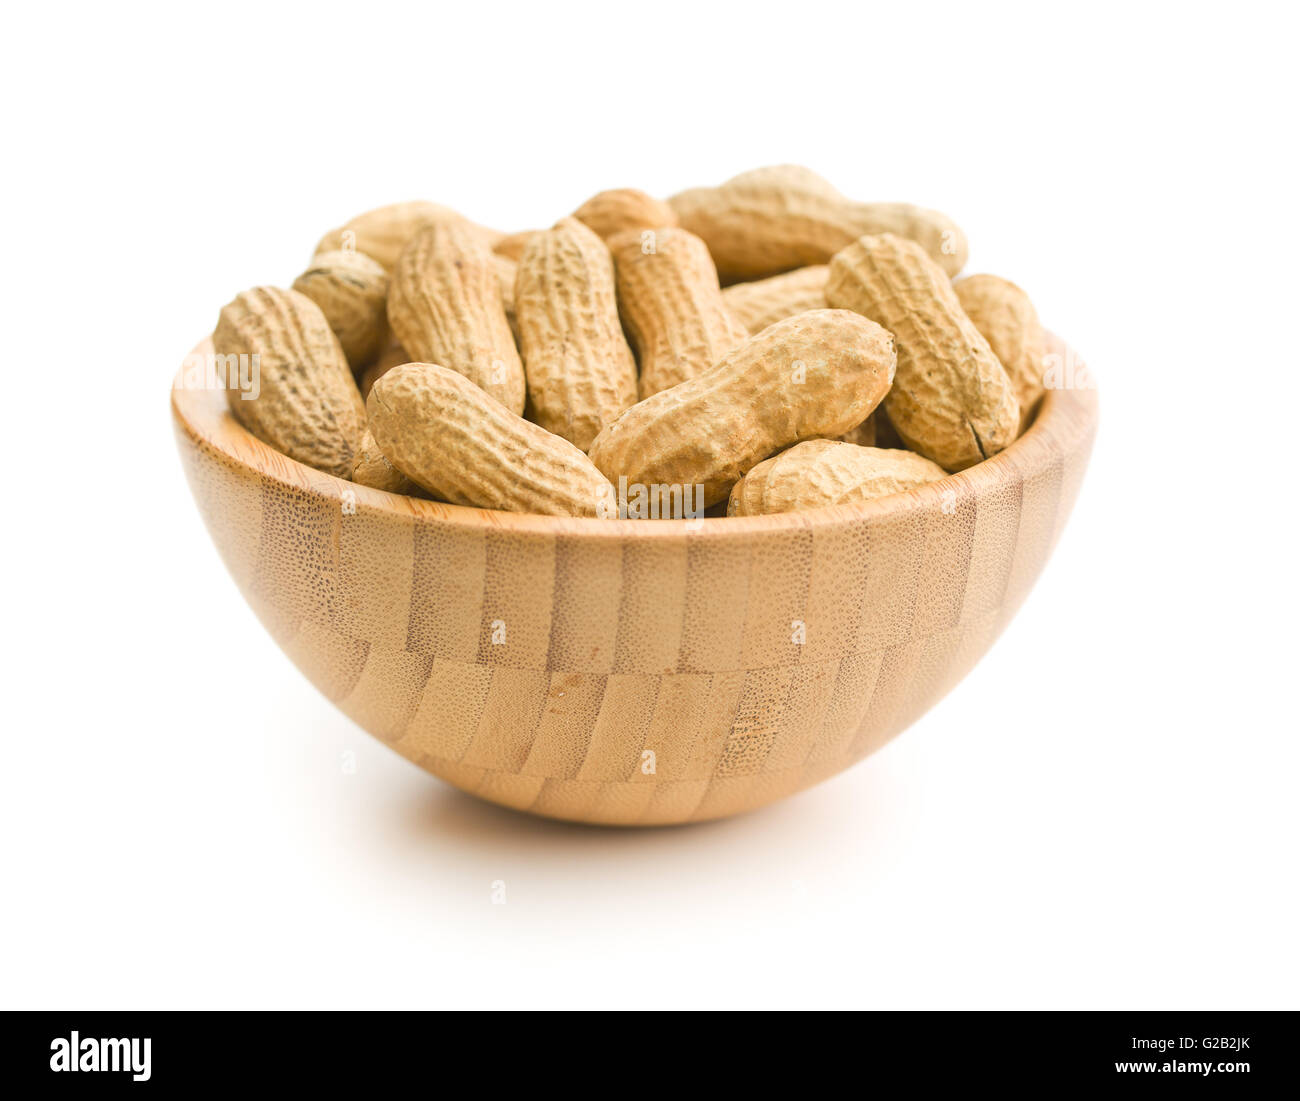 Dried peanuts in wooden bowl isolated on white background. Stock Photo